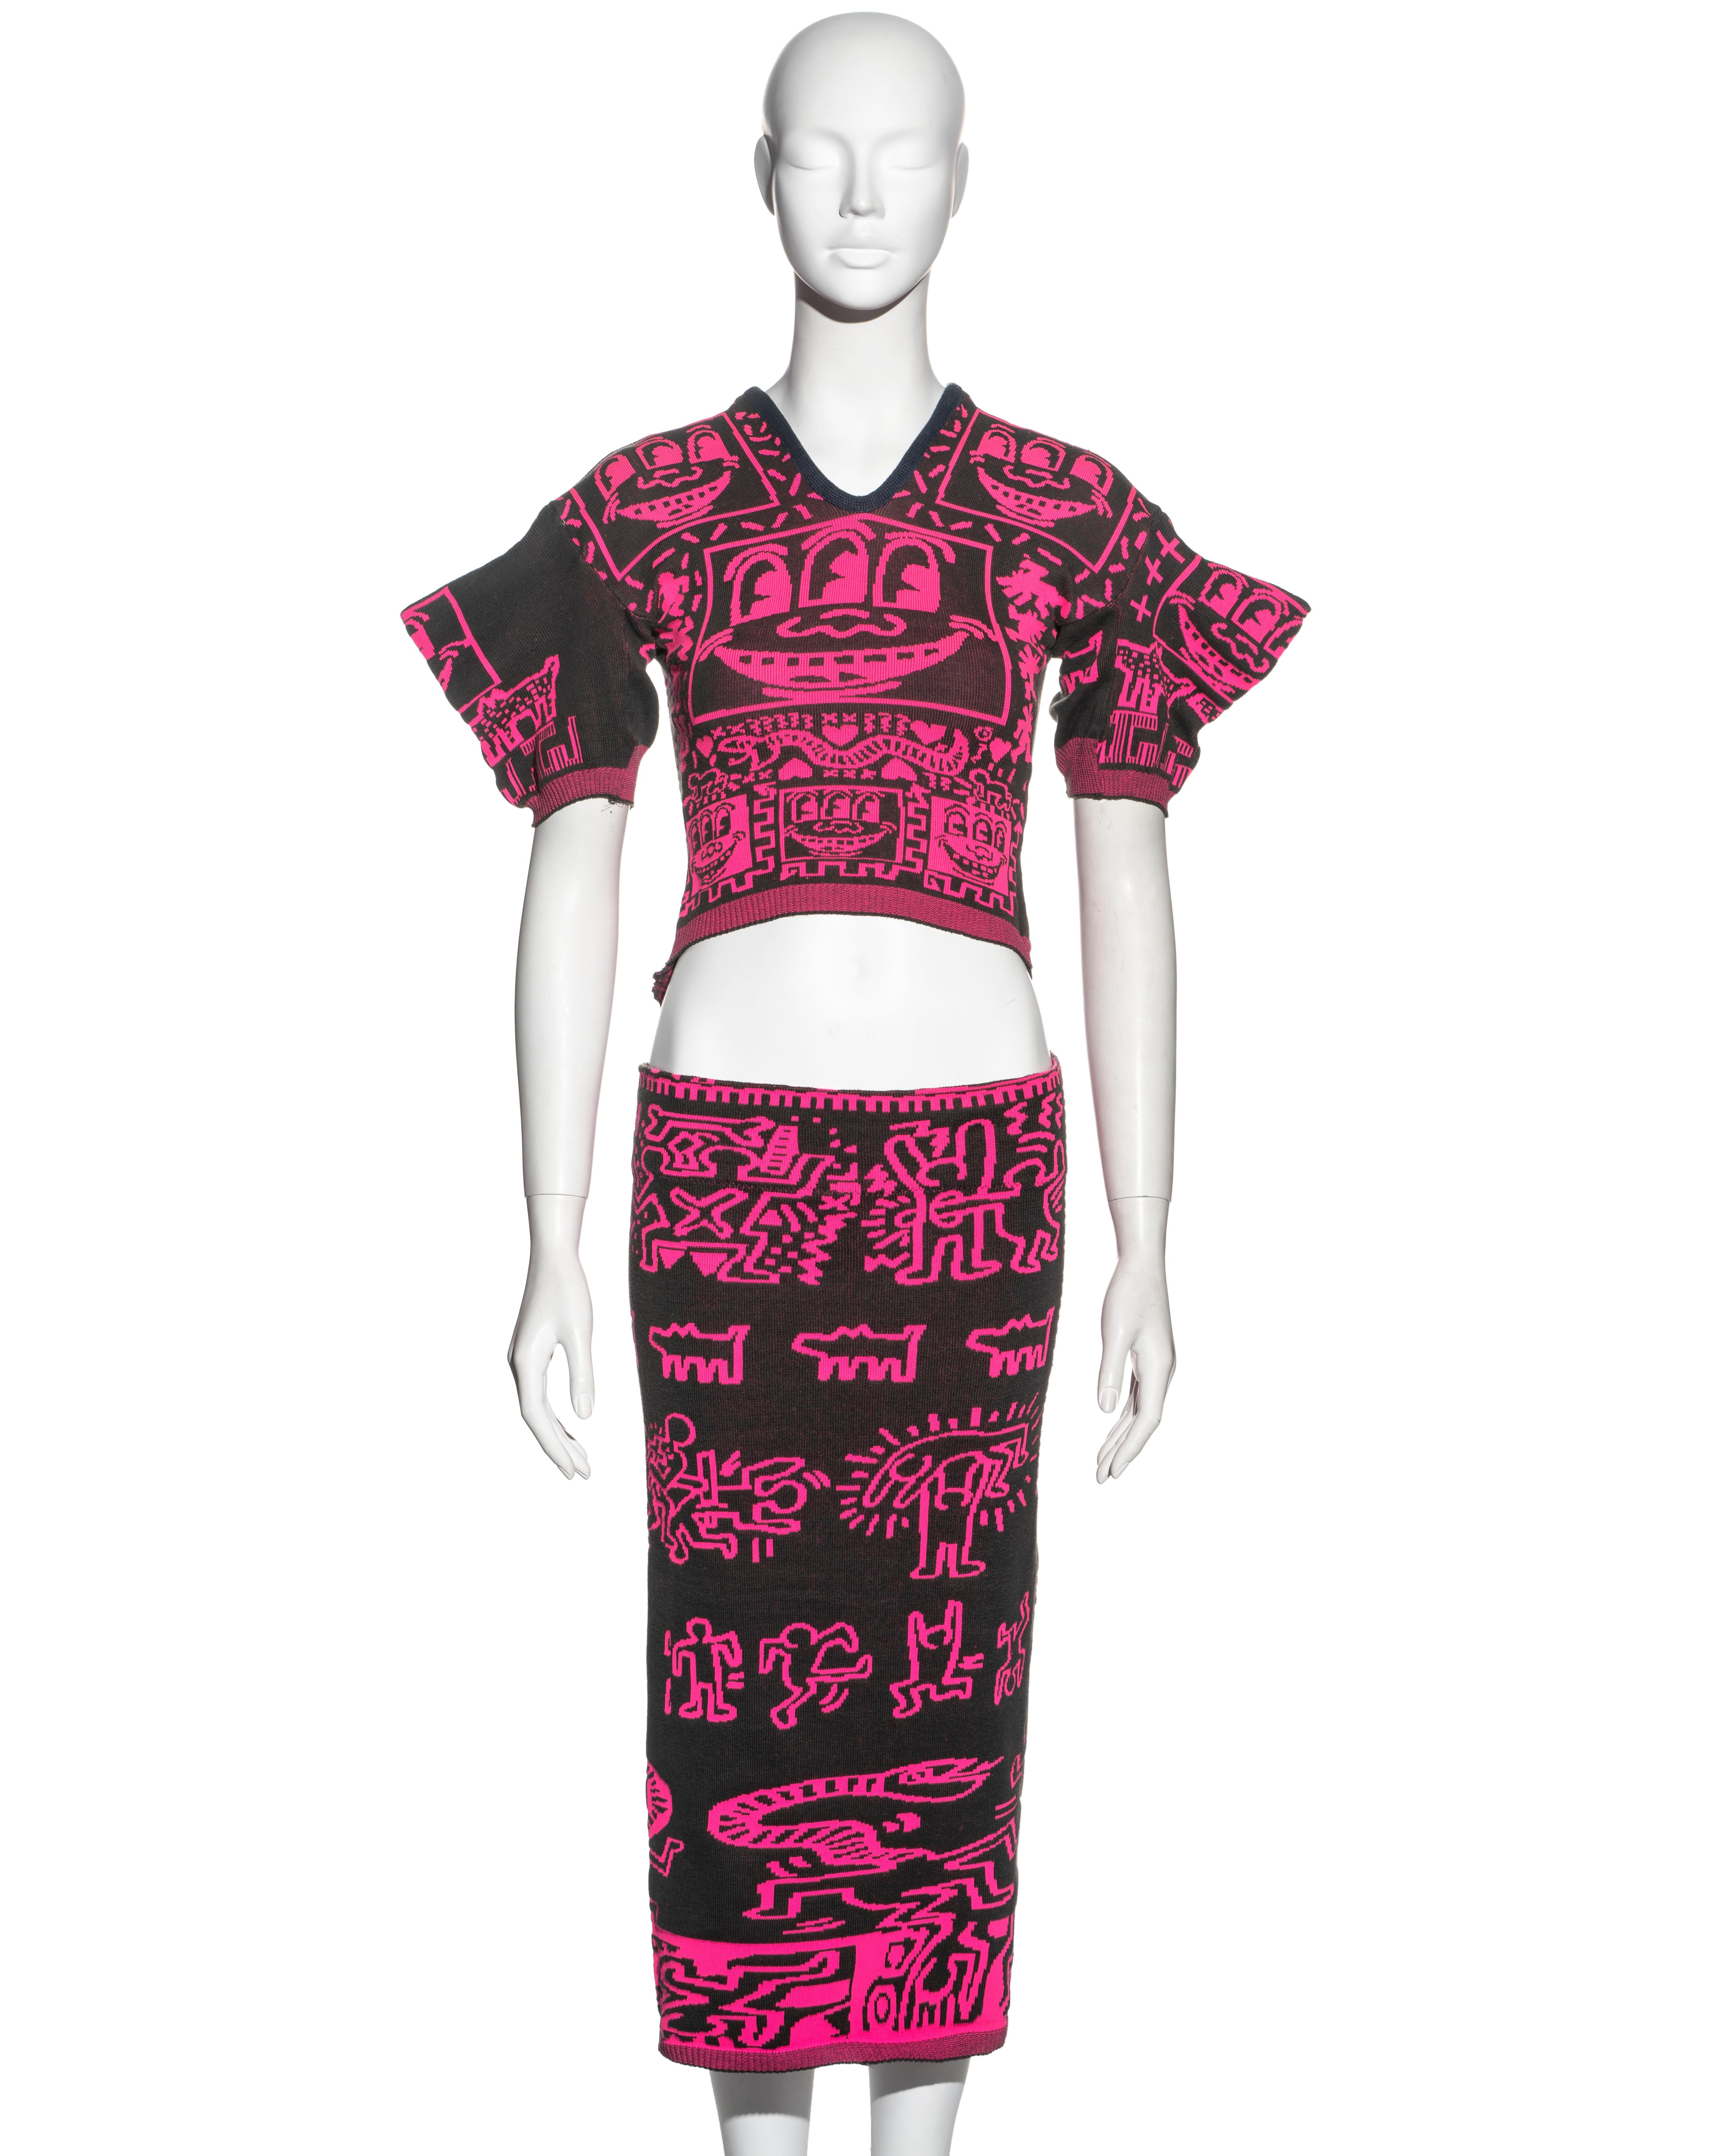 ▪ Worlds End by Vivienne Westwood and Malcolm McLaren in collaboration with Keith Haring 
▪ Sold by One of a Kind Archive
▪ Constructed from knit jersey in neon pink and dark grey
▪ Keith Haring woven imagery of smiley faces, figures, dogs and